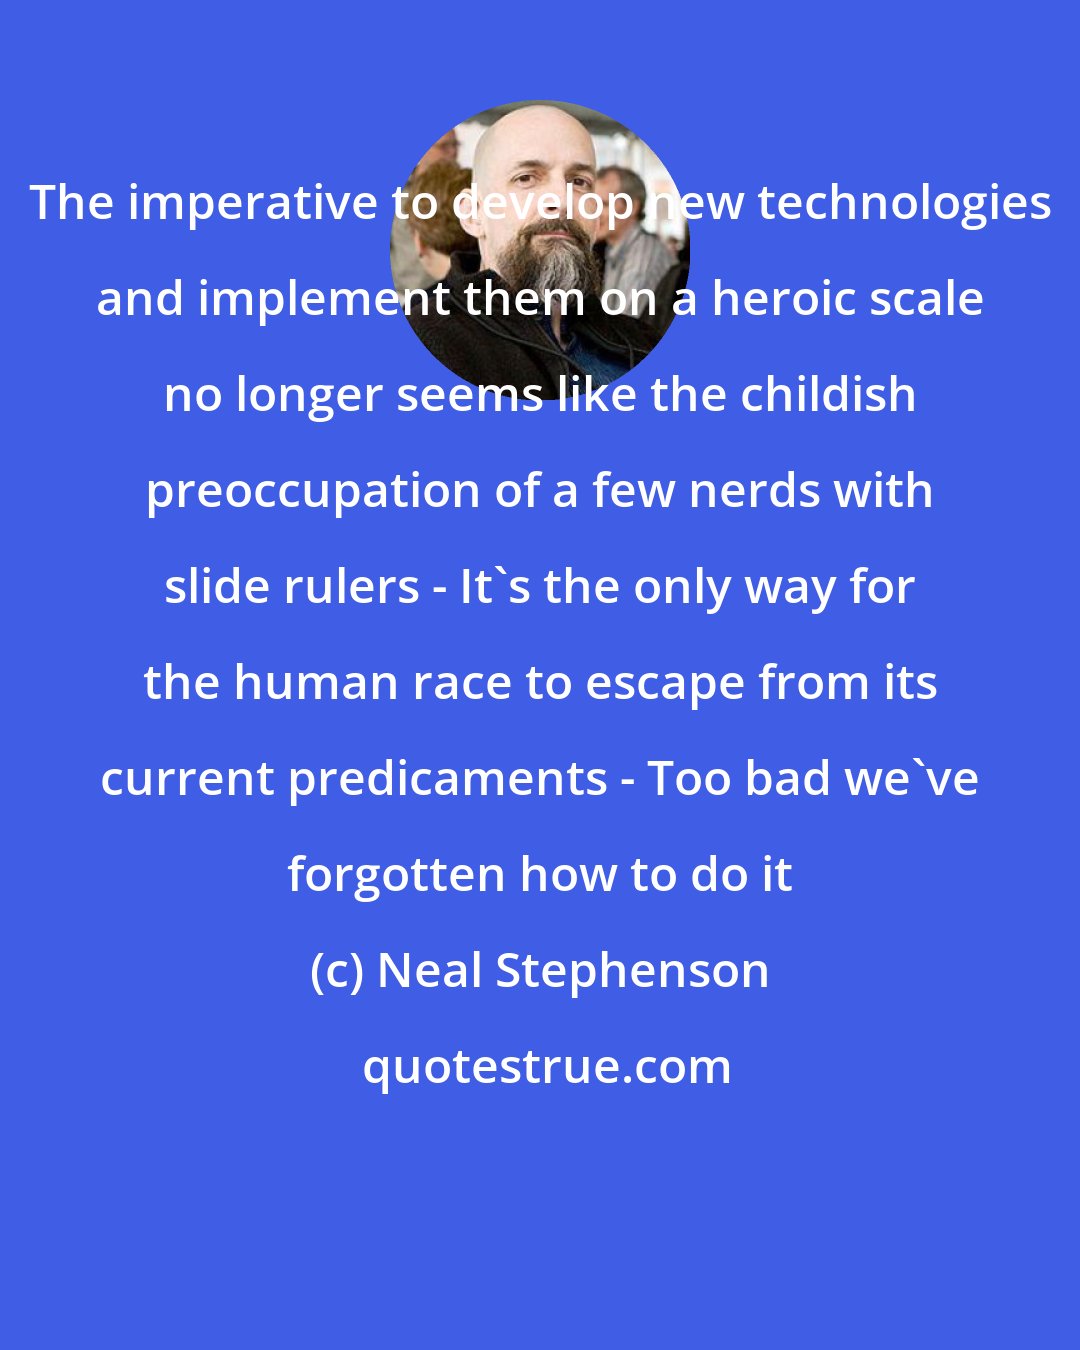 Neal Stephenson: The imperative to develop new technologies and implement them on a heroic scale no longer seems like the childish preoccupation of a few nerds with slide rulers - It's the only way for the human race to escape from its current predicaments - Too bad we've forgotten how to do it